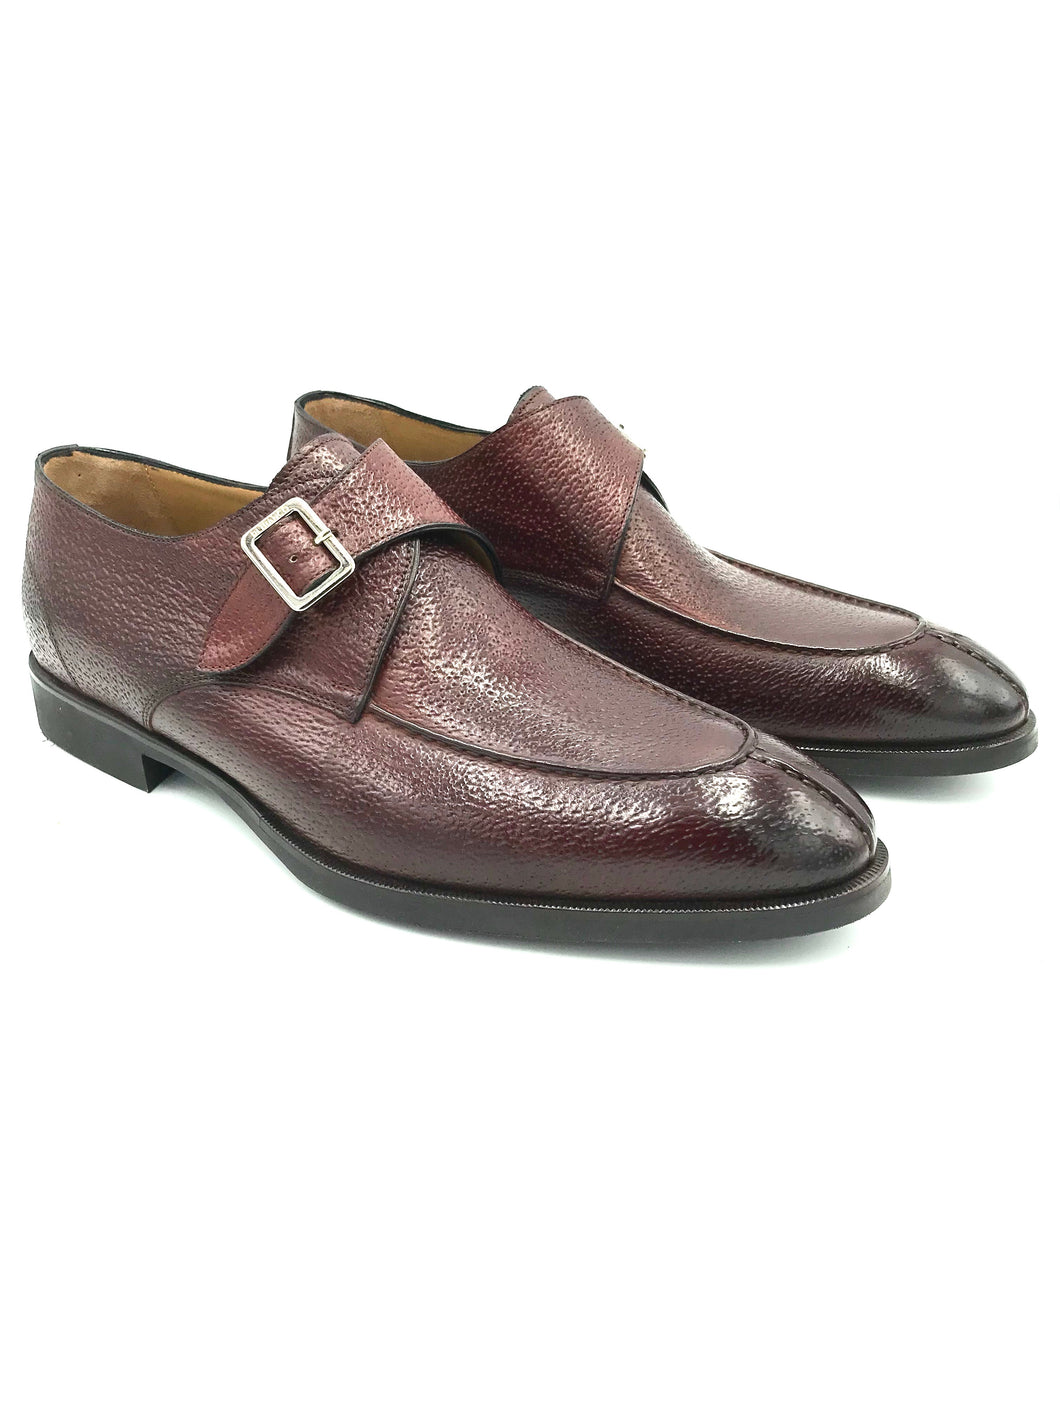 Di Bianco shoes SC542 monk strap in pecarry rust.